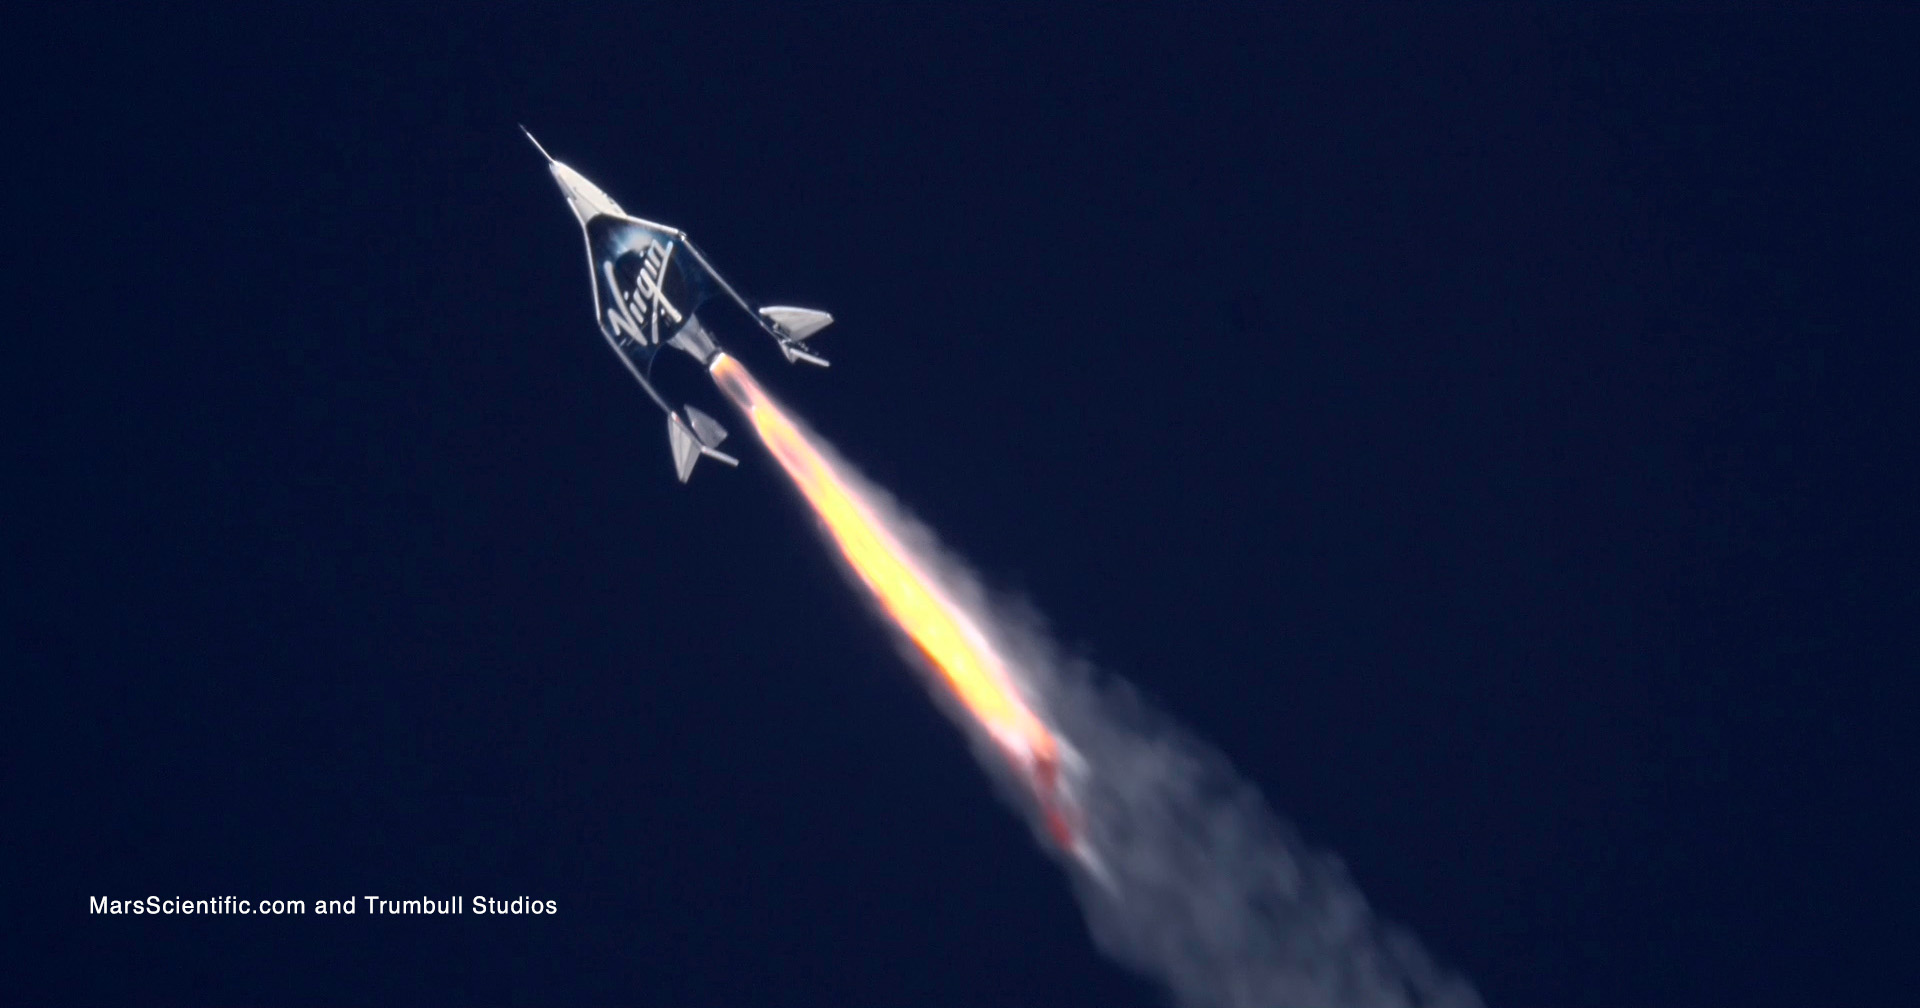 Virgin Galactic's suborbital vehicle made its second flight to space on Feb. 22, 2019.